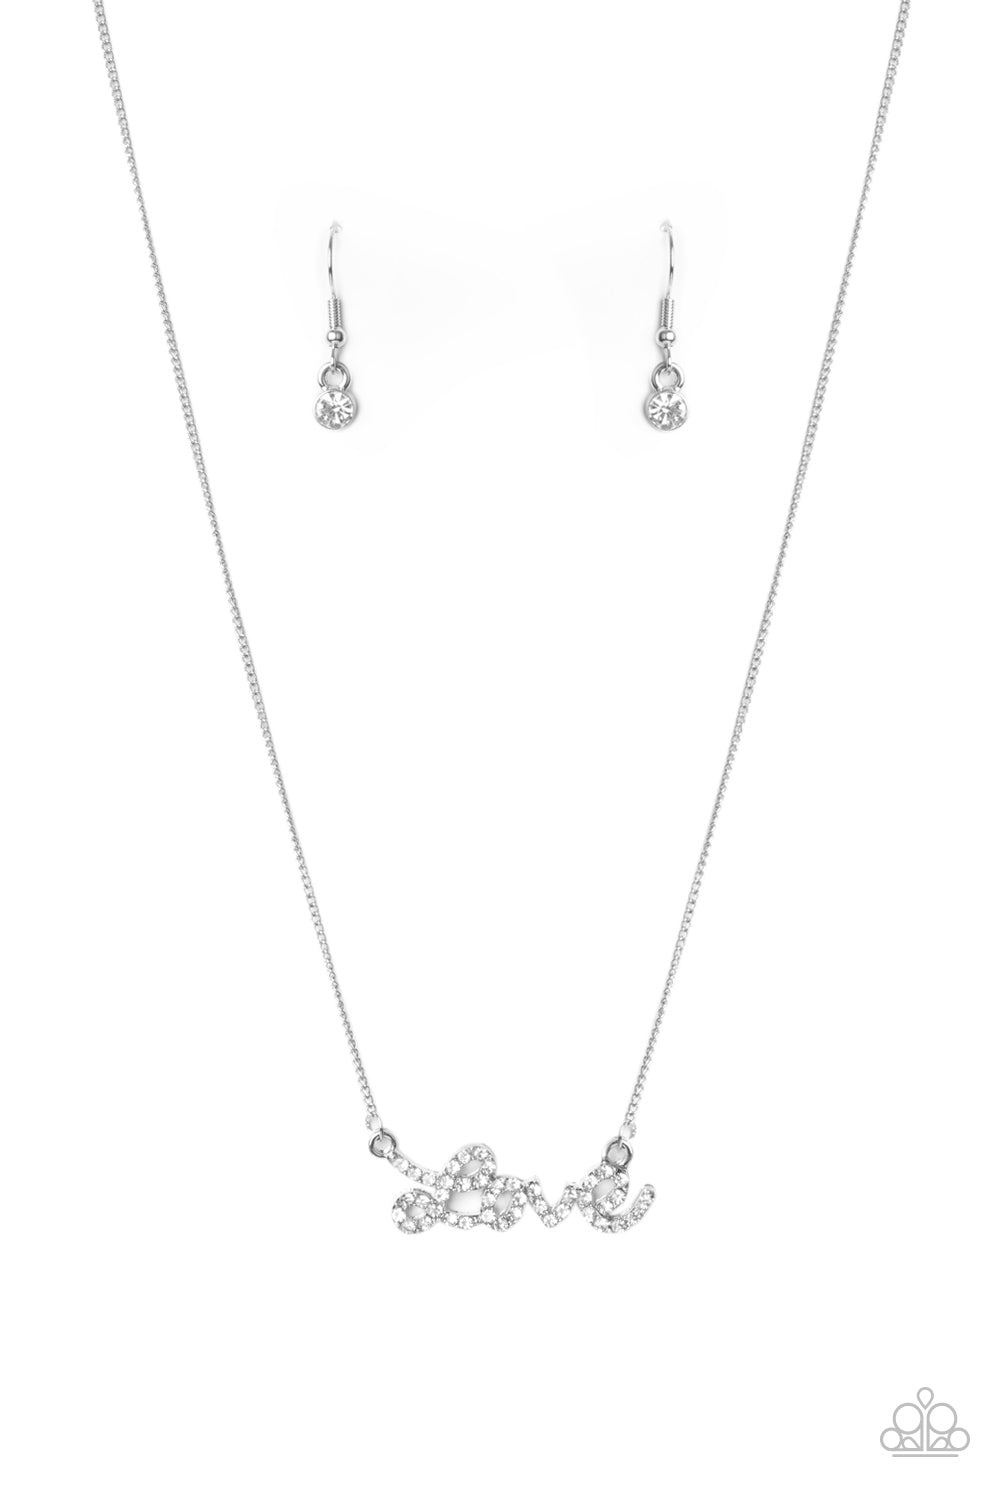 Paparazzi Accessories - Head Over Heels In Love - White Necklace